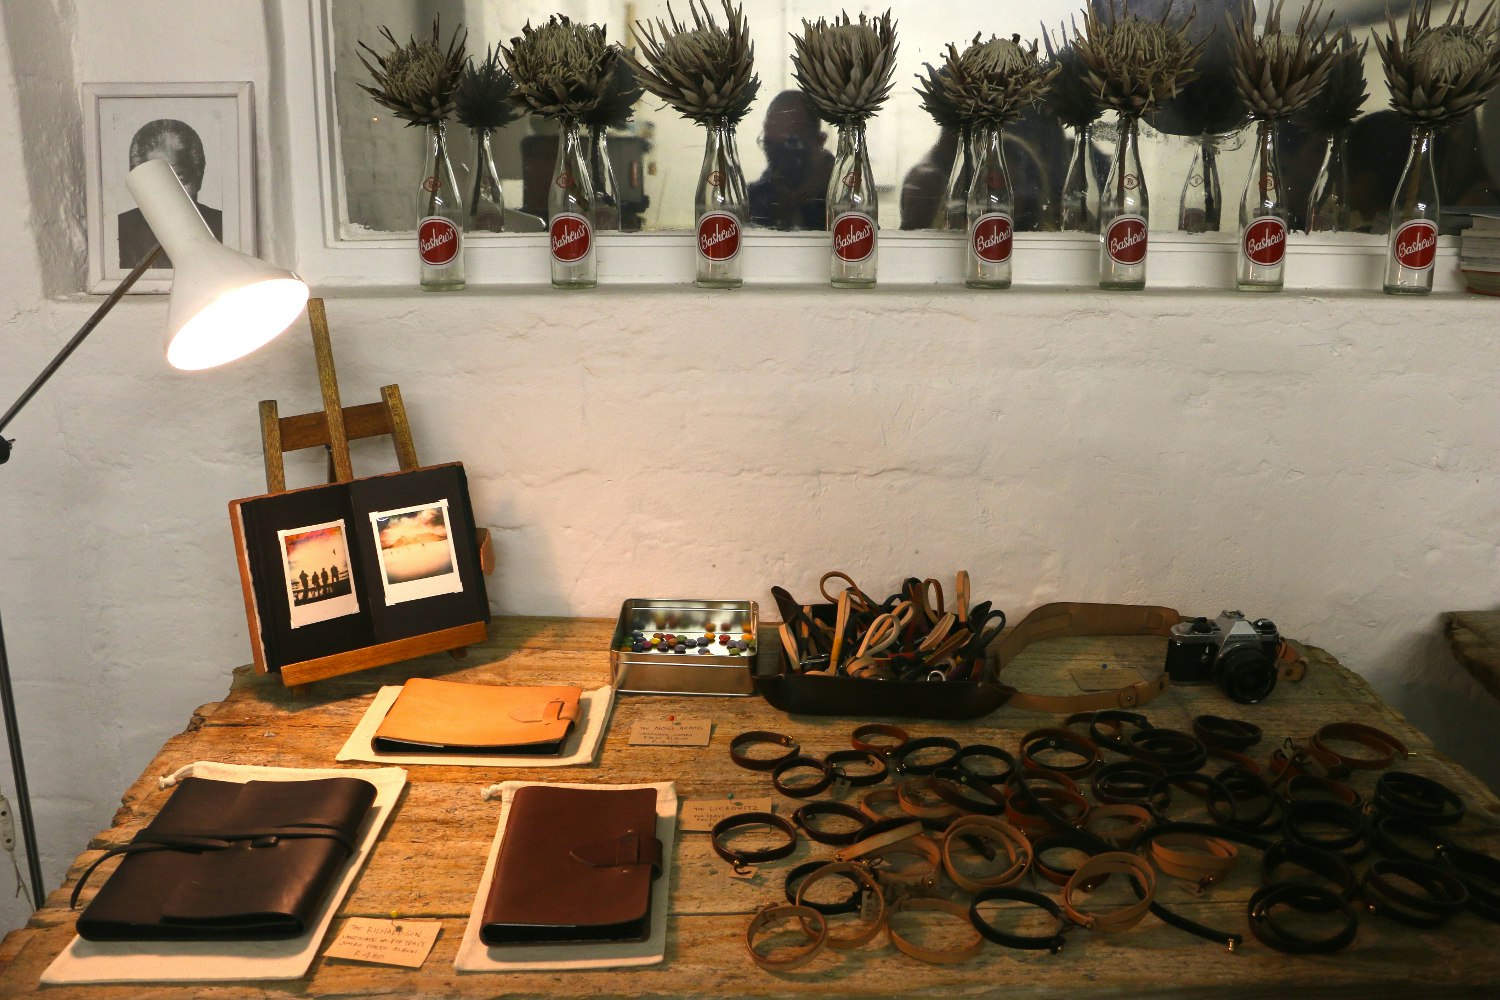 Hand-crafted leather products at Woodstock Cycleworks. Image by Simon Richmond / Lonely Planet